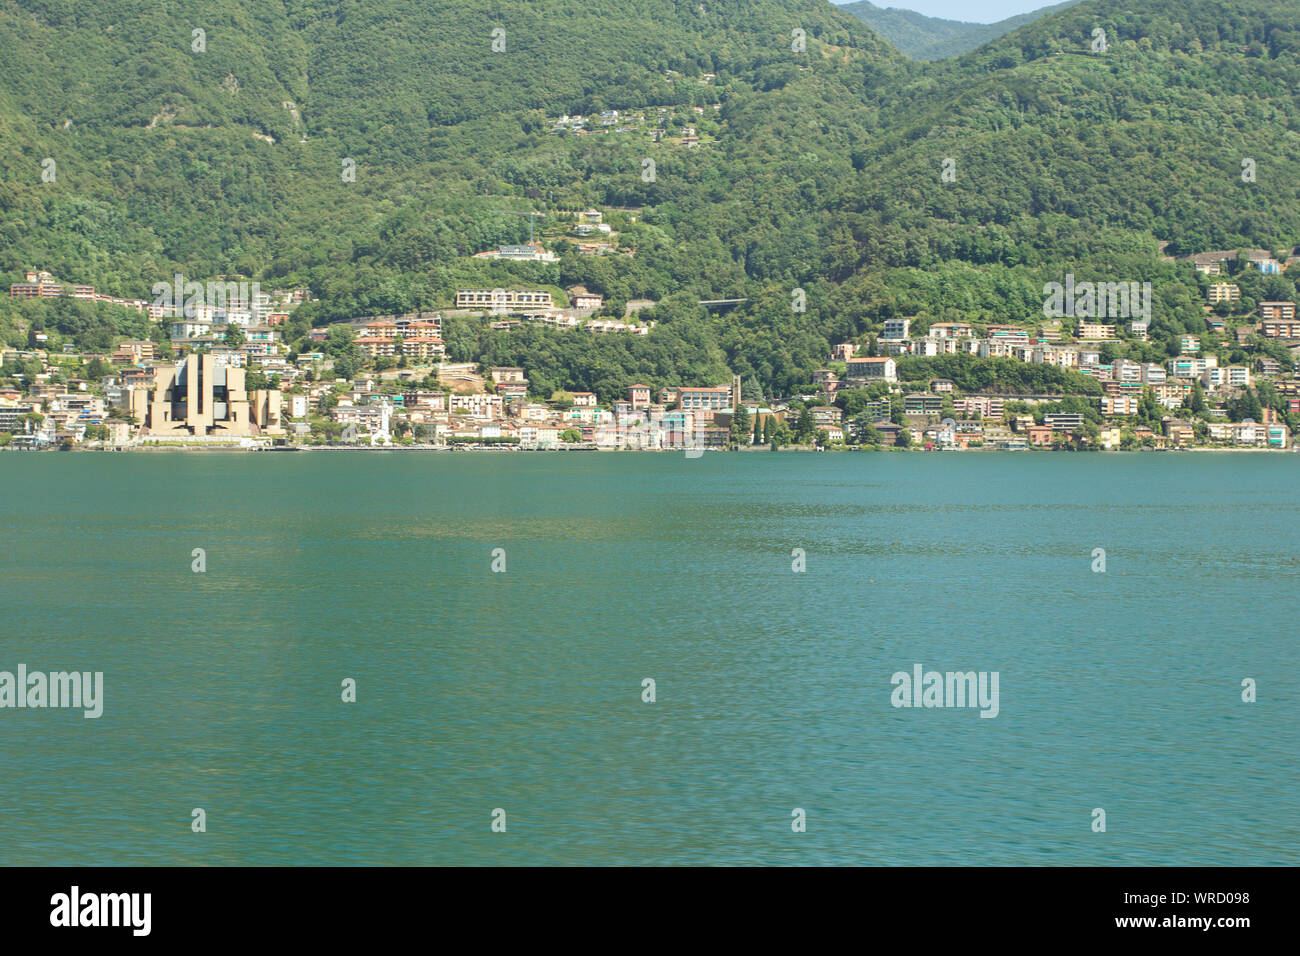 Campione d'Italia with its casino (Europe's largest casino), an italian enclave surrounded by the Swiss canton of Ticino (view from the lake Lugano) Stock Photo